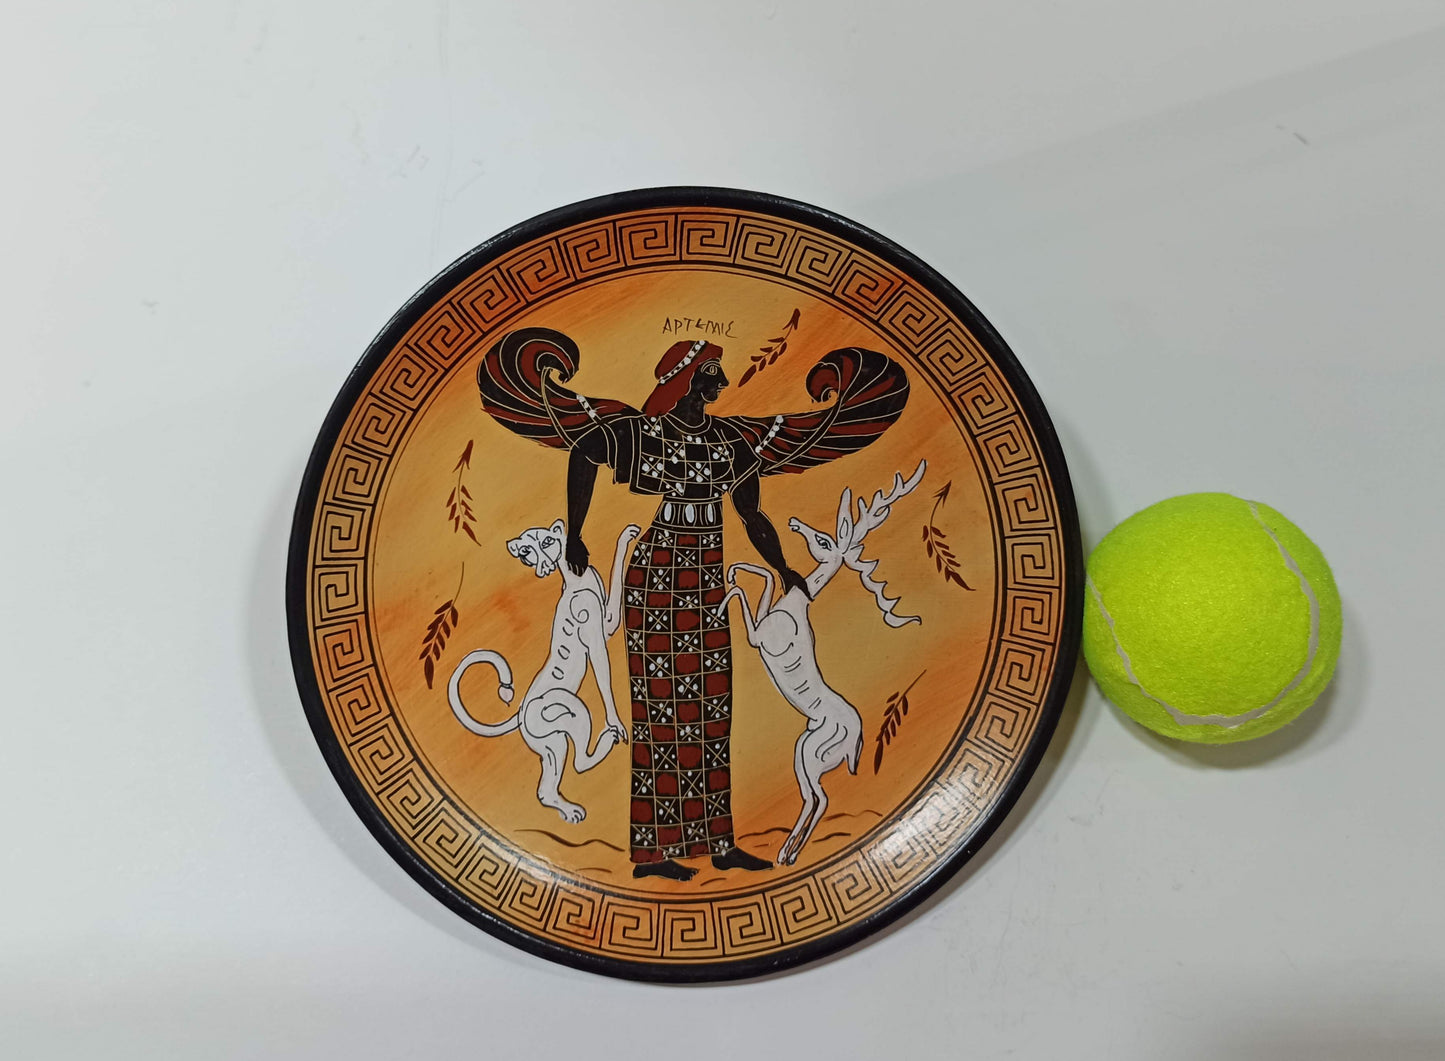 Artemis Diana - Greek Roman Goddess of Hunt, the Wilderness, Wild animals, the Moon and Chastity - Ceramic plate - Handmade in Greece